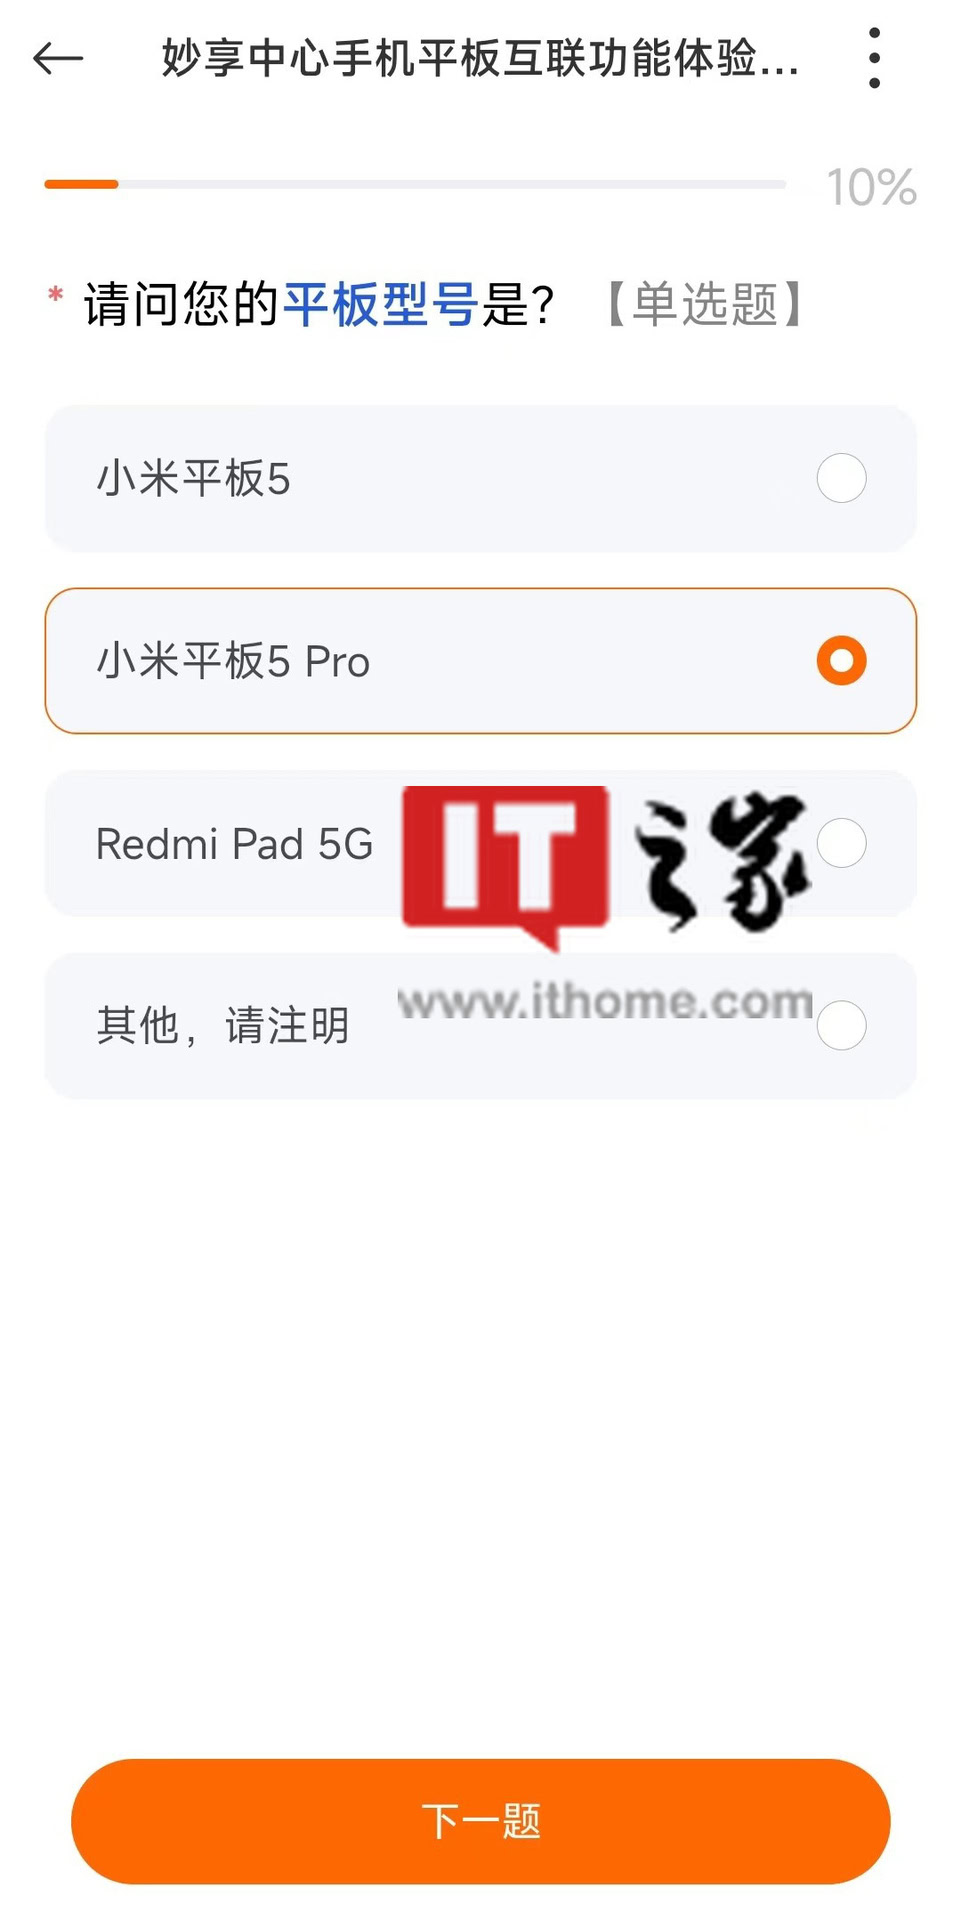 The Redmi Pad could take the fight to cheaper Android tablets